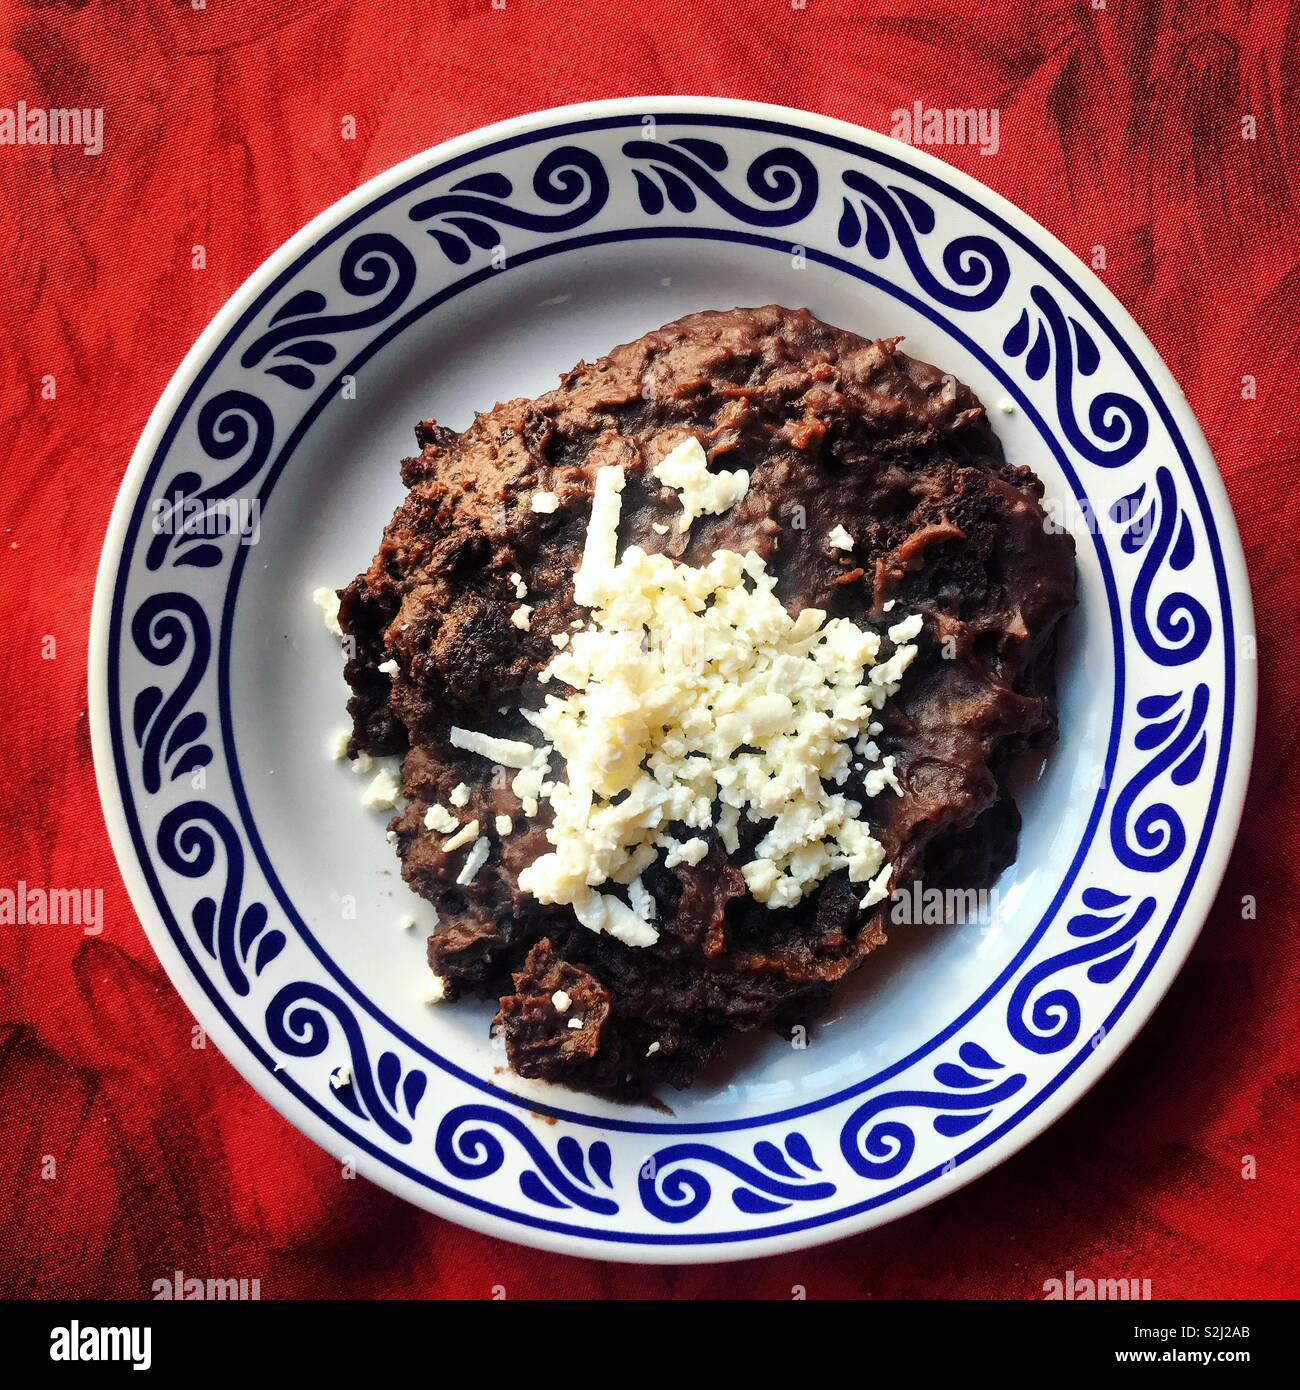 Black beans with cheese in a “talavera” ceramic plate on a red table in Santa Clara restaurant in Puebla, Mexico Stock Photo